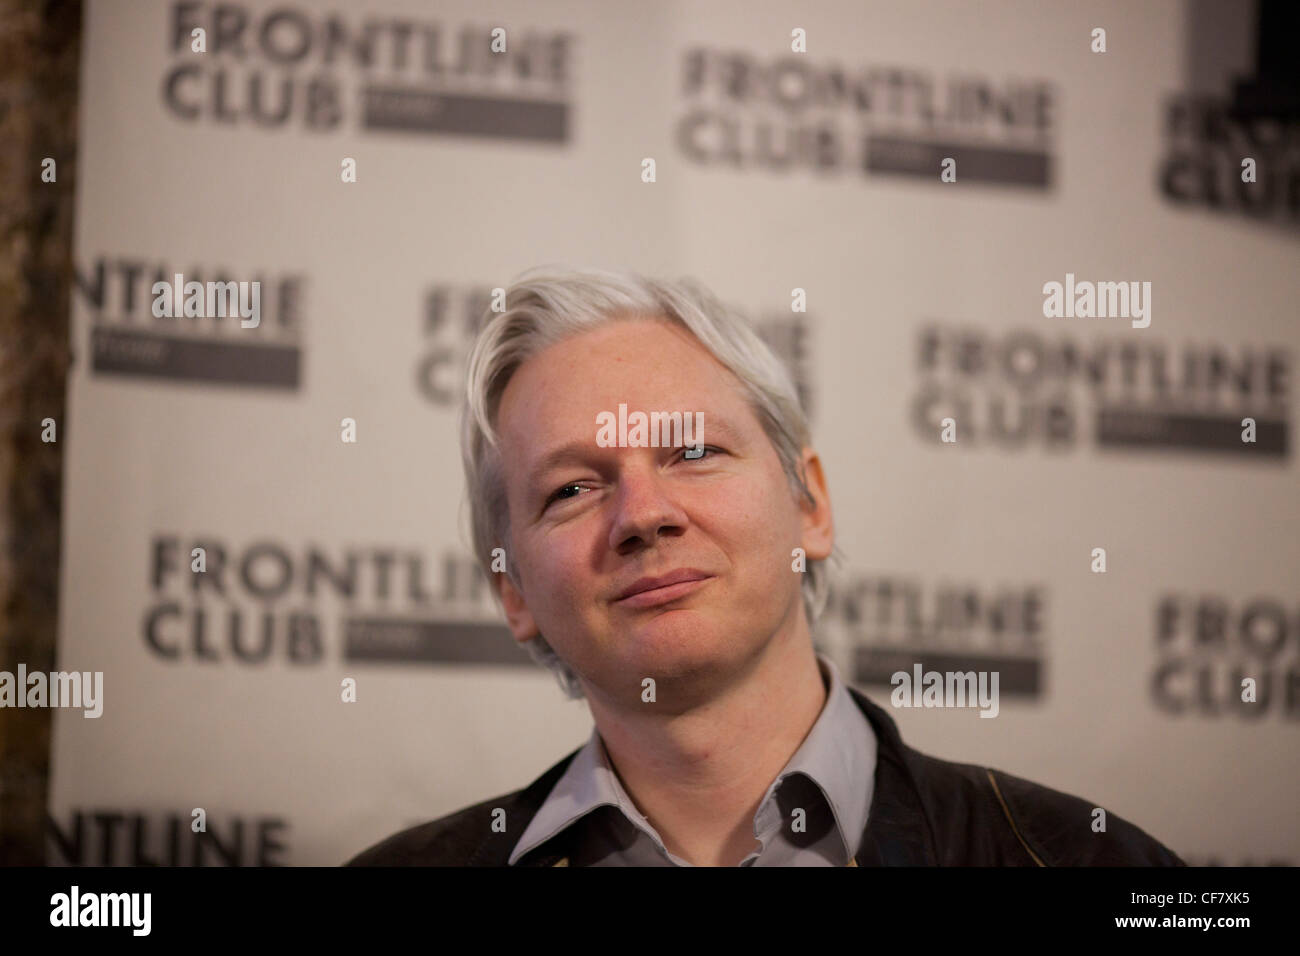 Julian Assange Wikileaks founder is seen during a press conference at The Frontline Club London Stock Photo